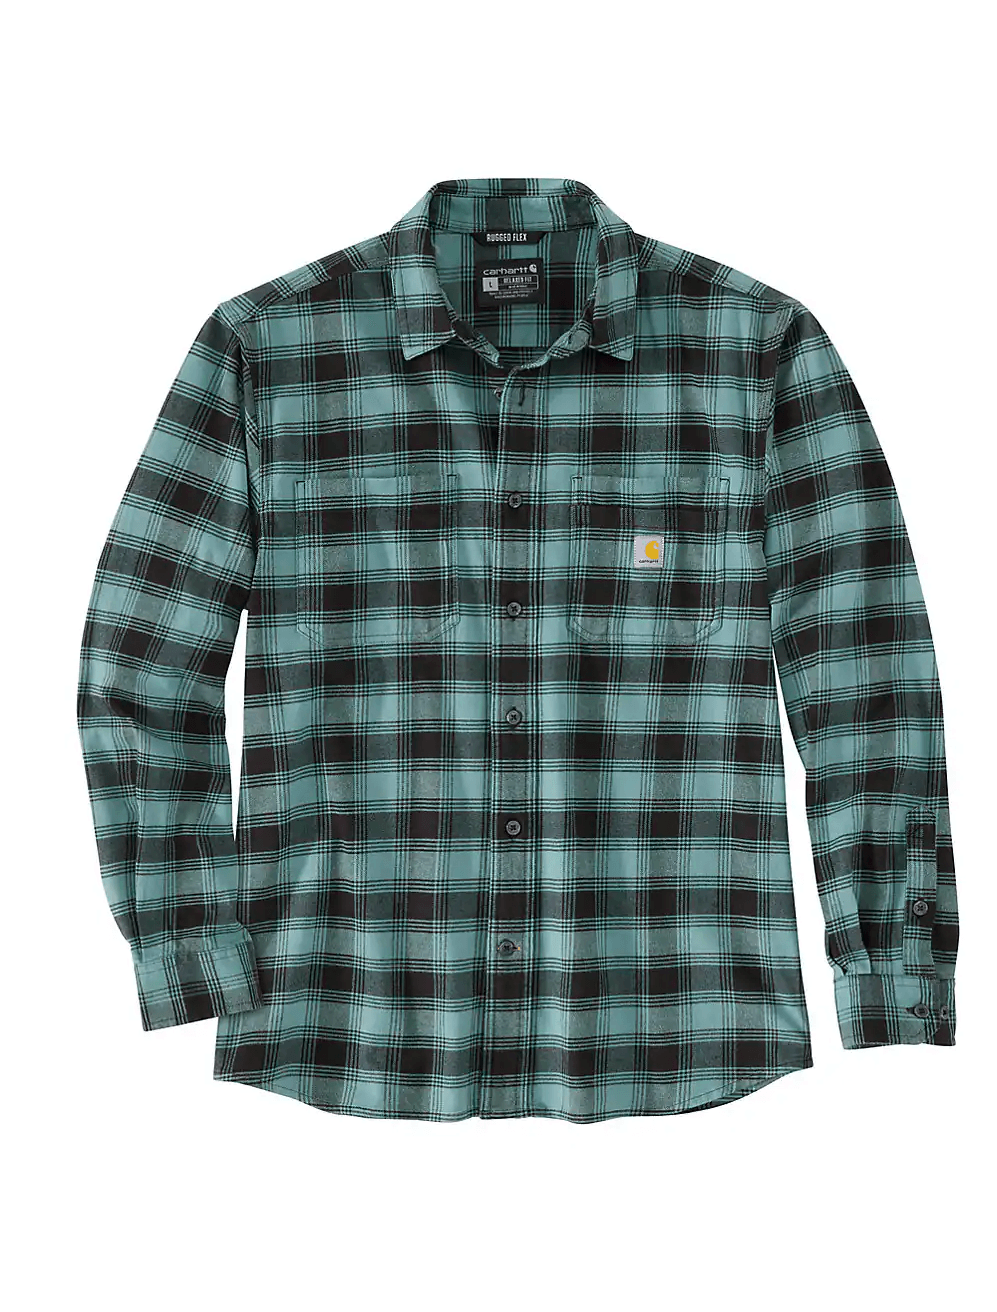 105945 - Rugged flex® relaxed fit midweight flannel long-sleeve plaid shirt - Sea Pine/Black - Purpose-Built / Home of the Trades